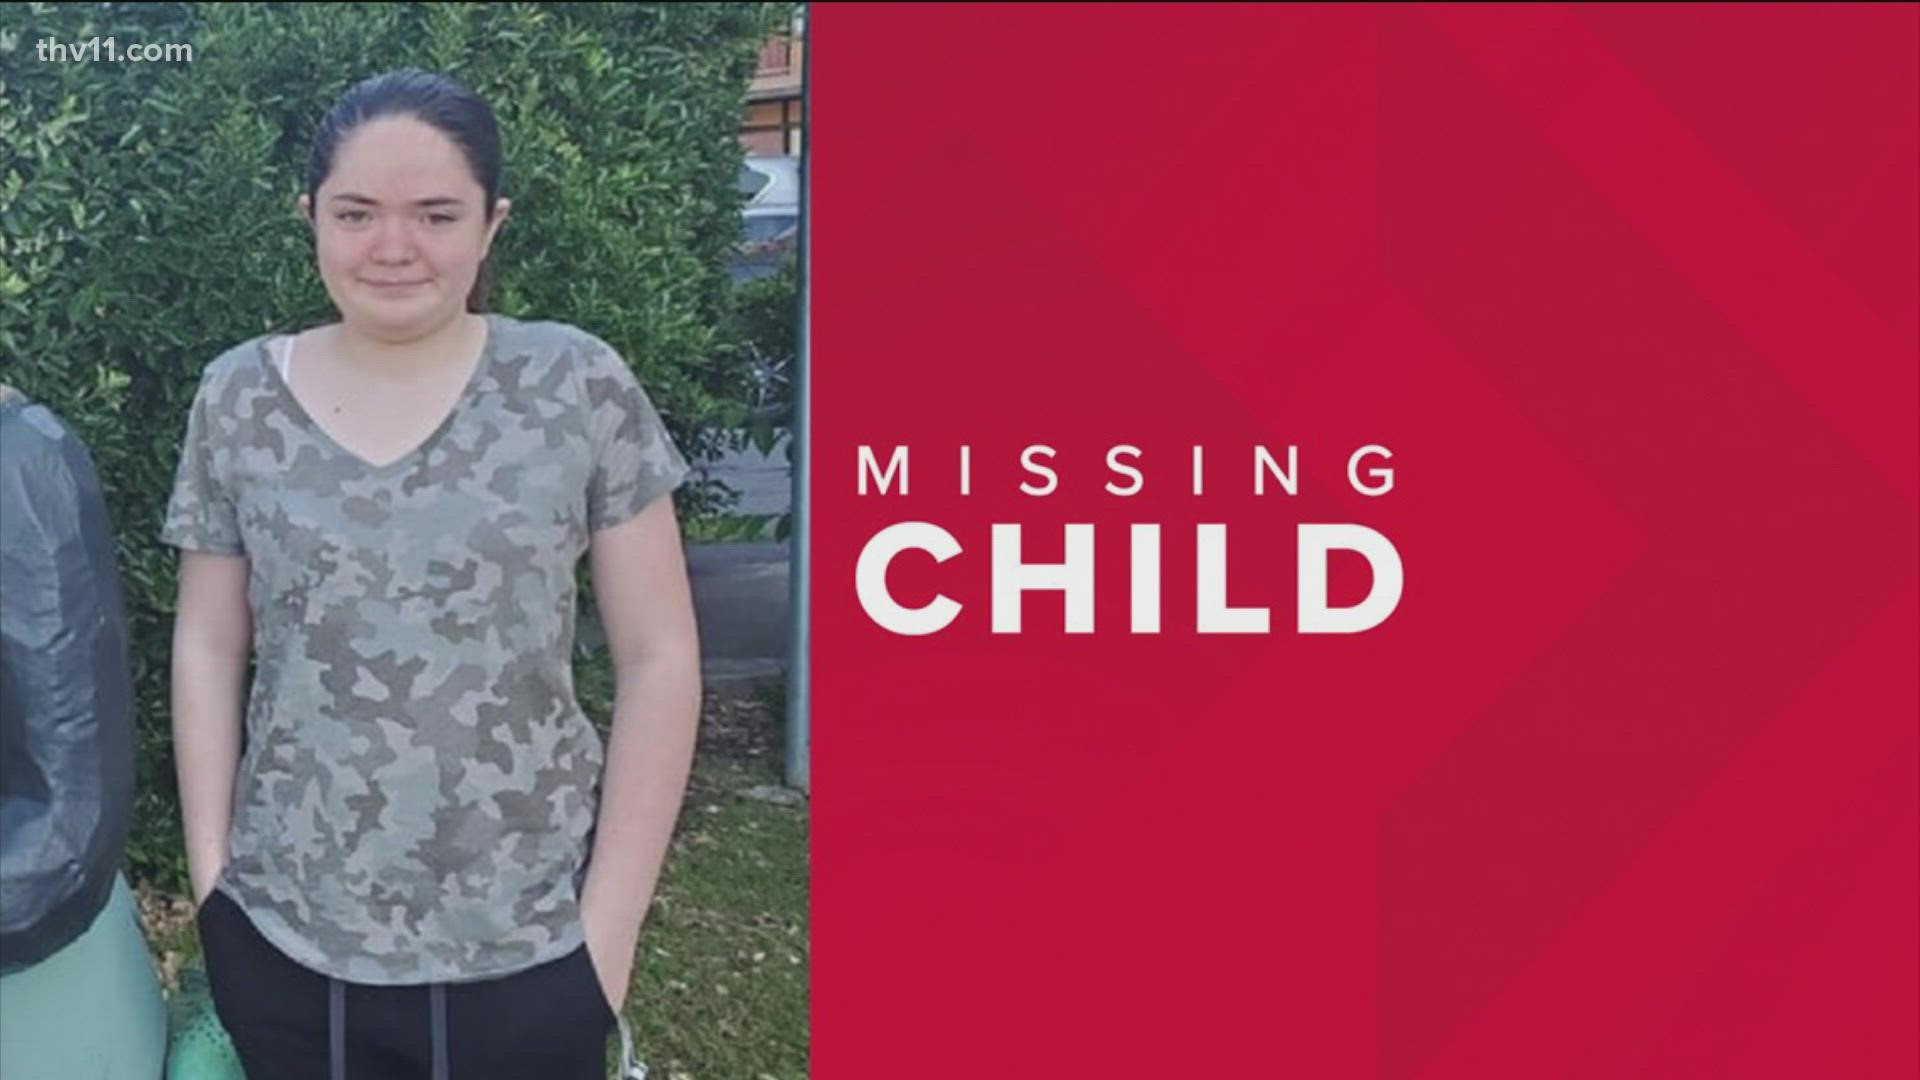 Police say 12-year-old Julieanna Norrell was last seen Sunday morning at her home.